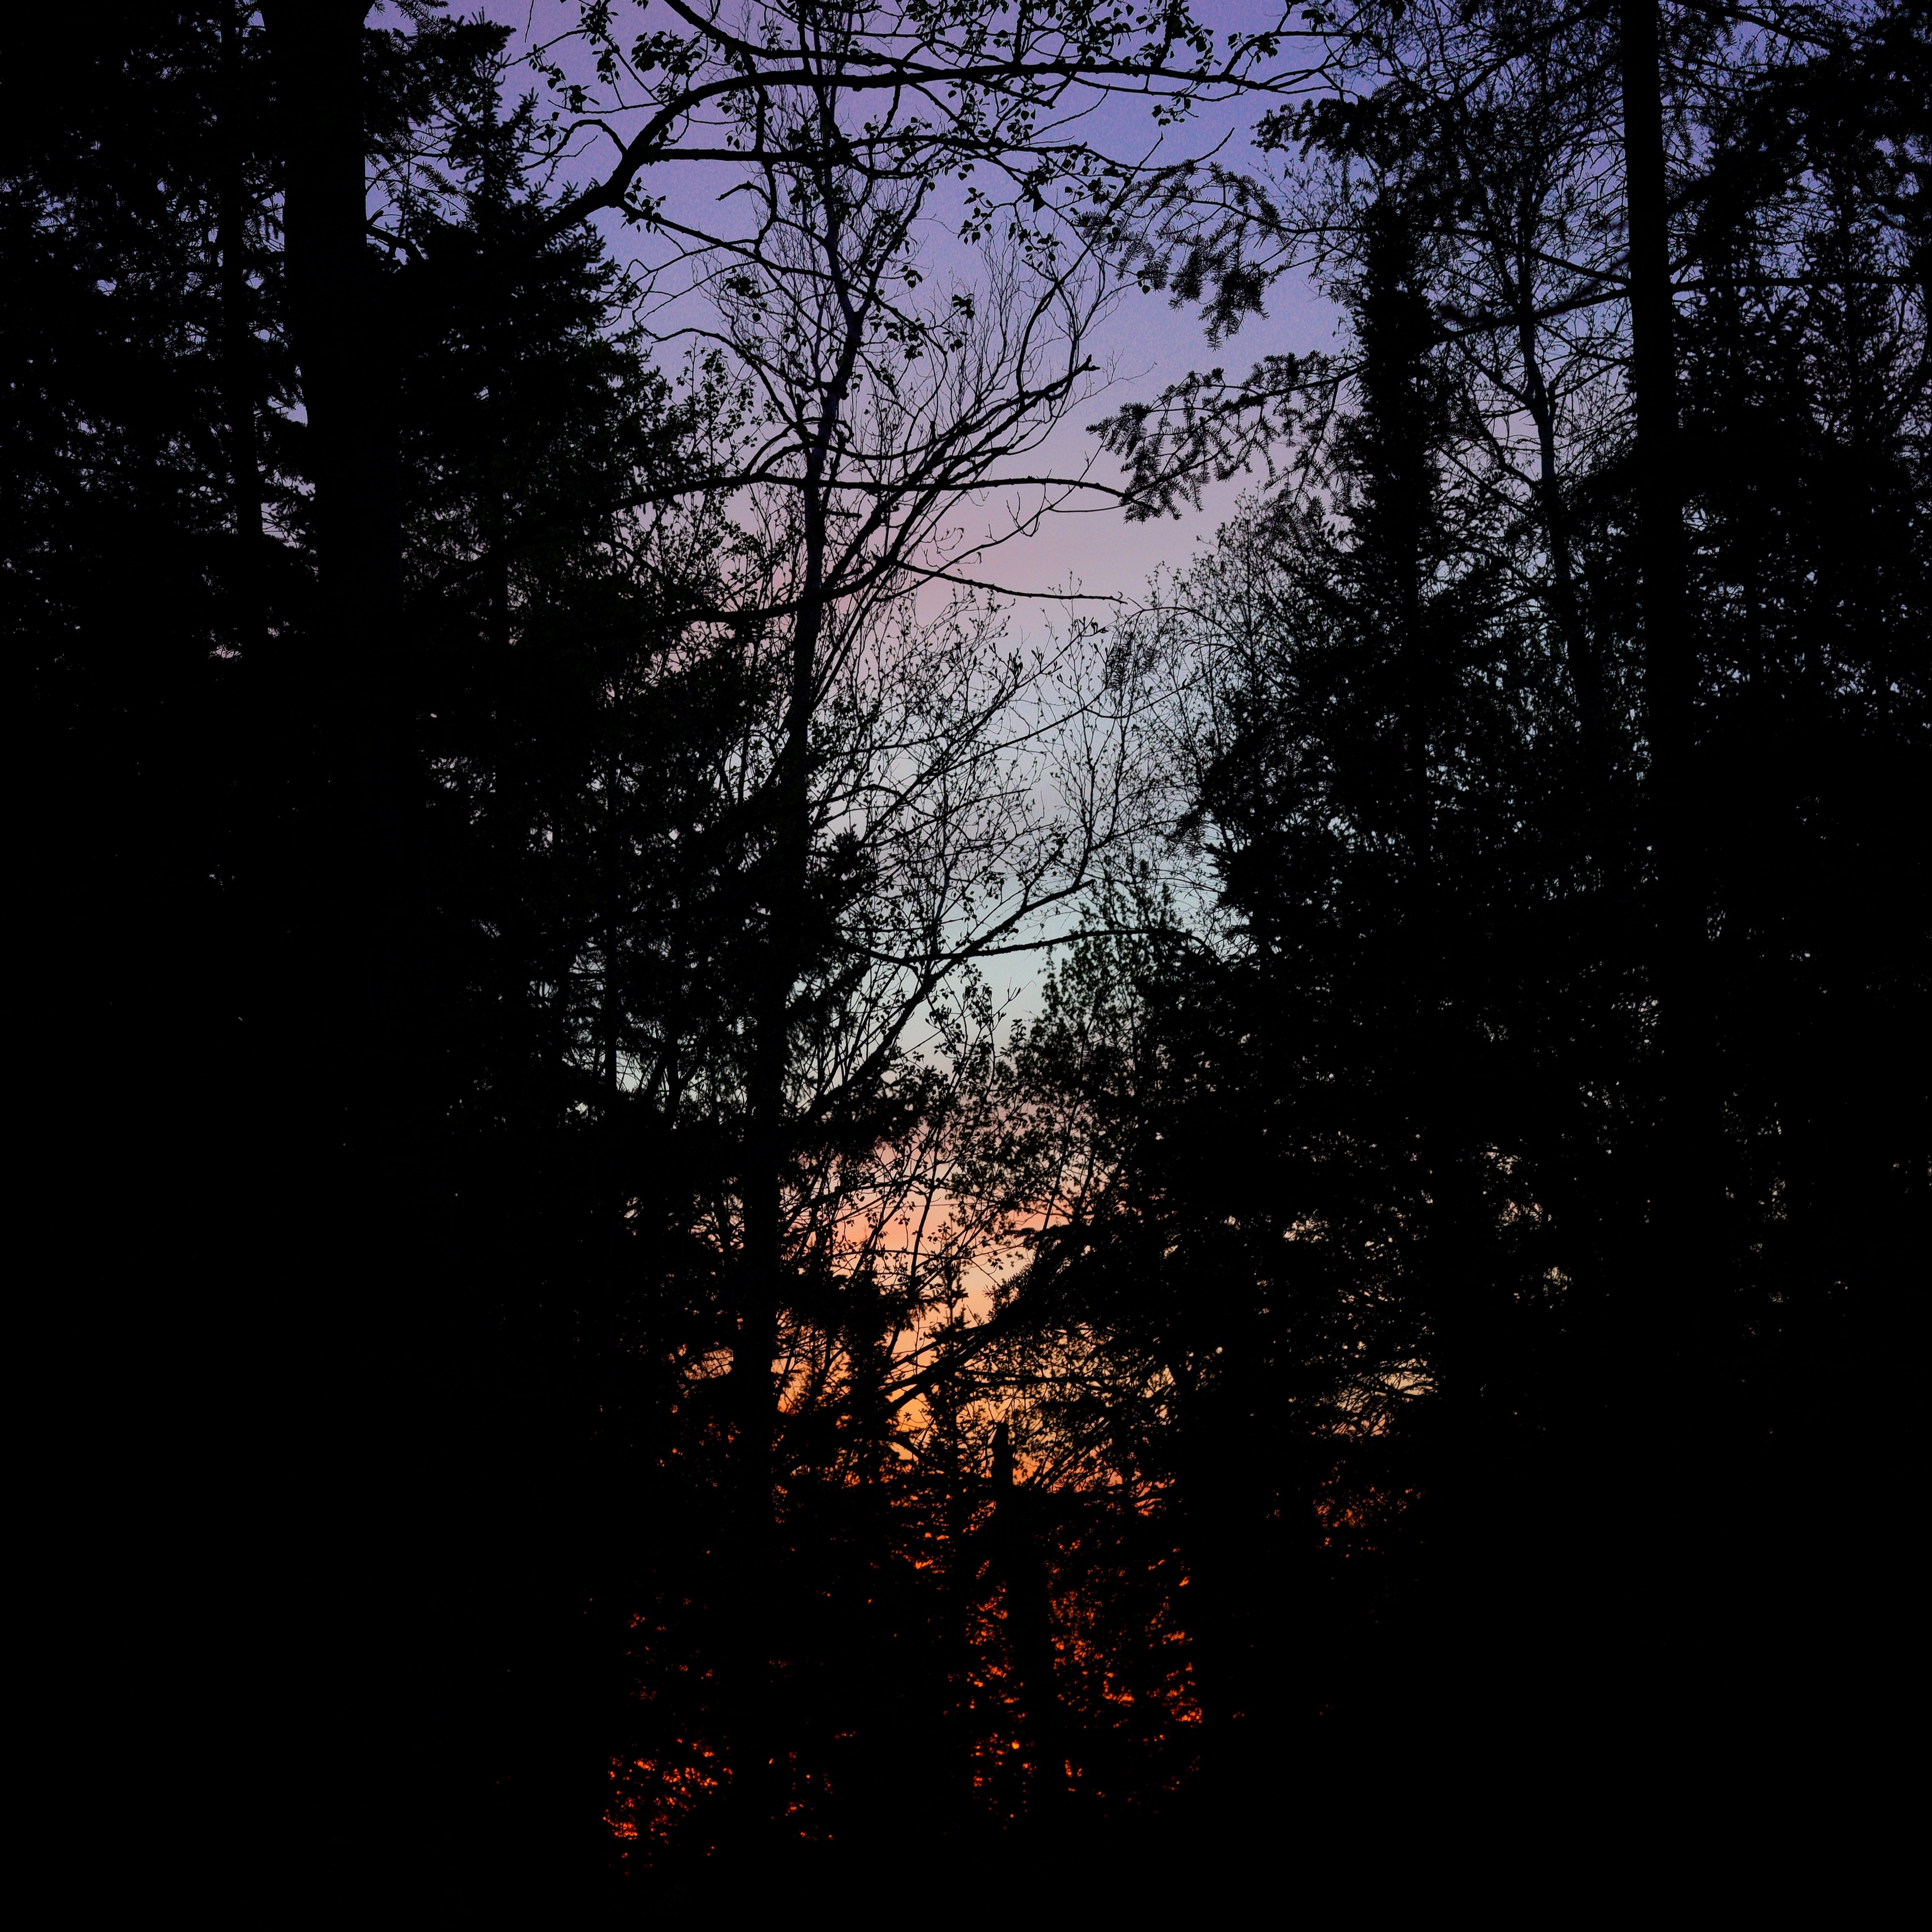 Wallpaper Trees, Branches, Sunset, Dark, Forest - Sun Set In A Dark Forest - HD Wallpaper 